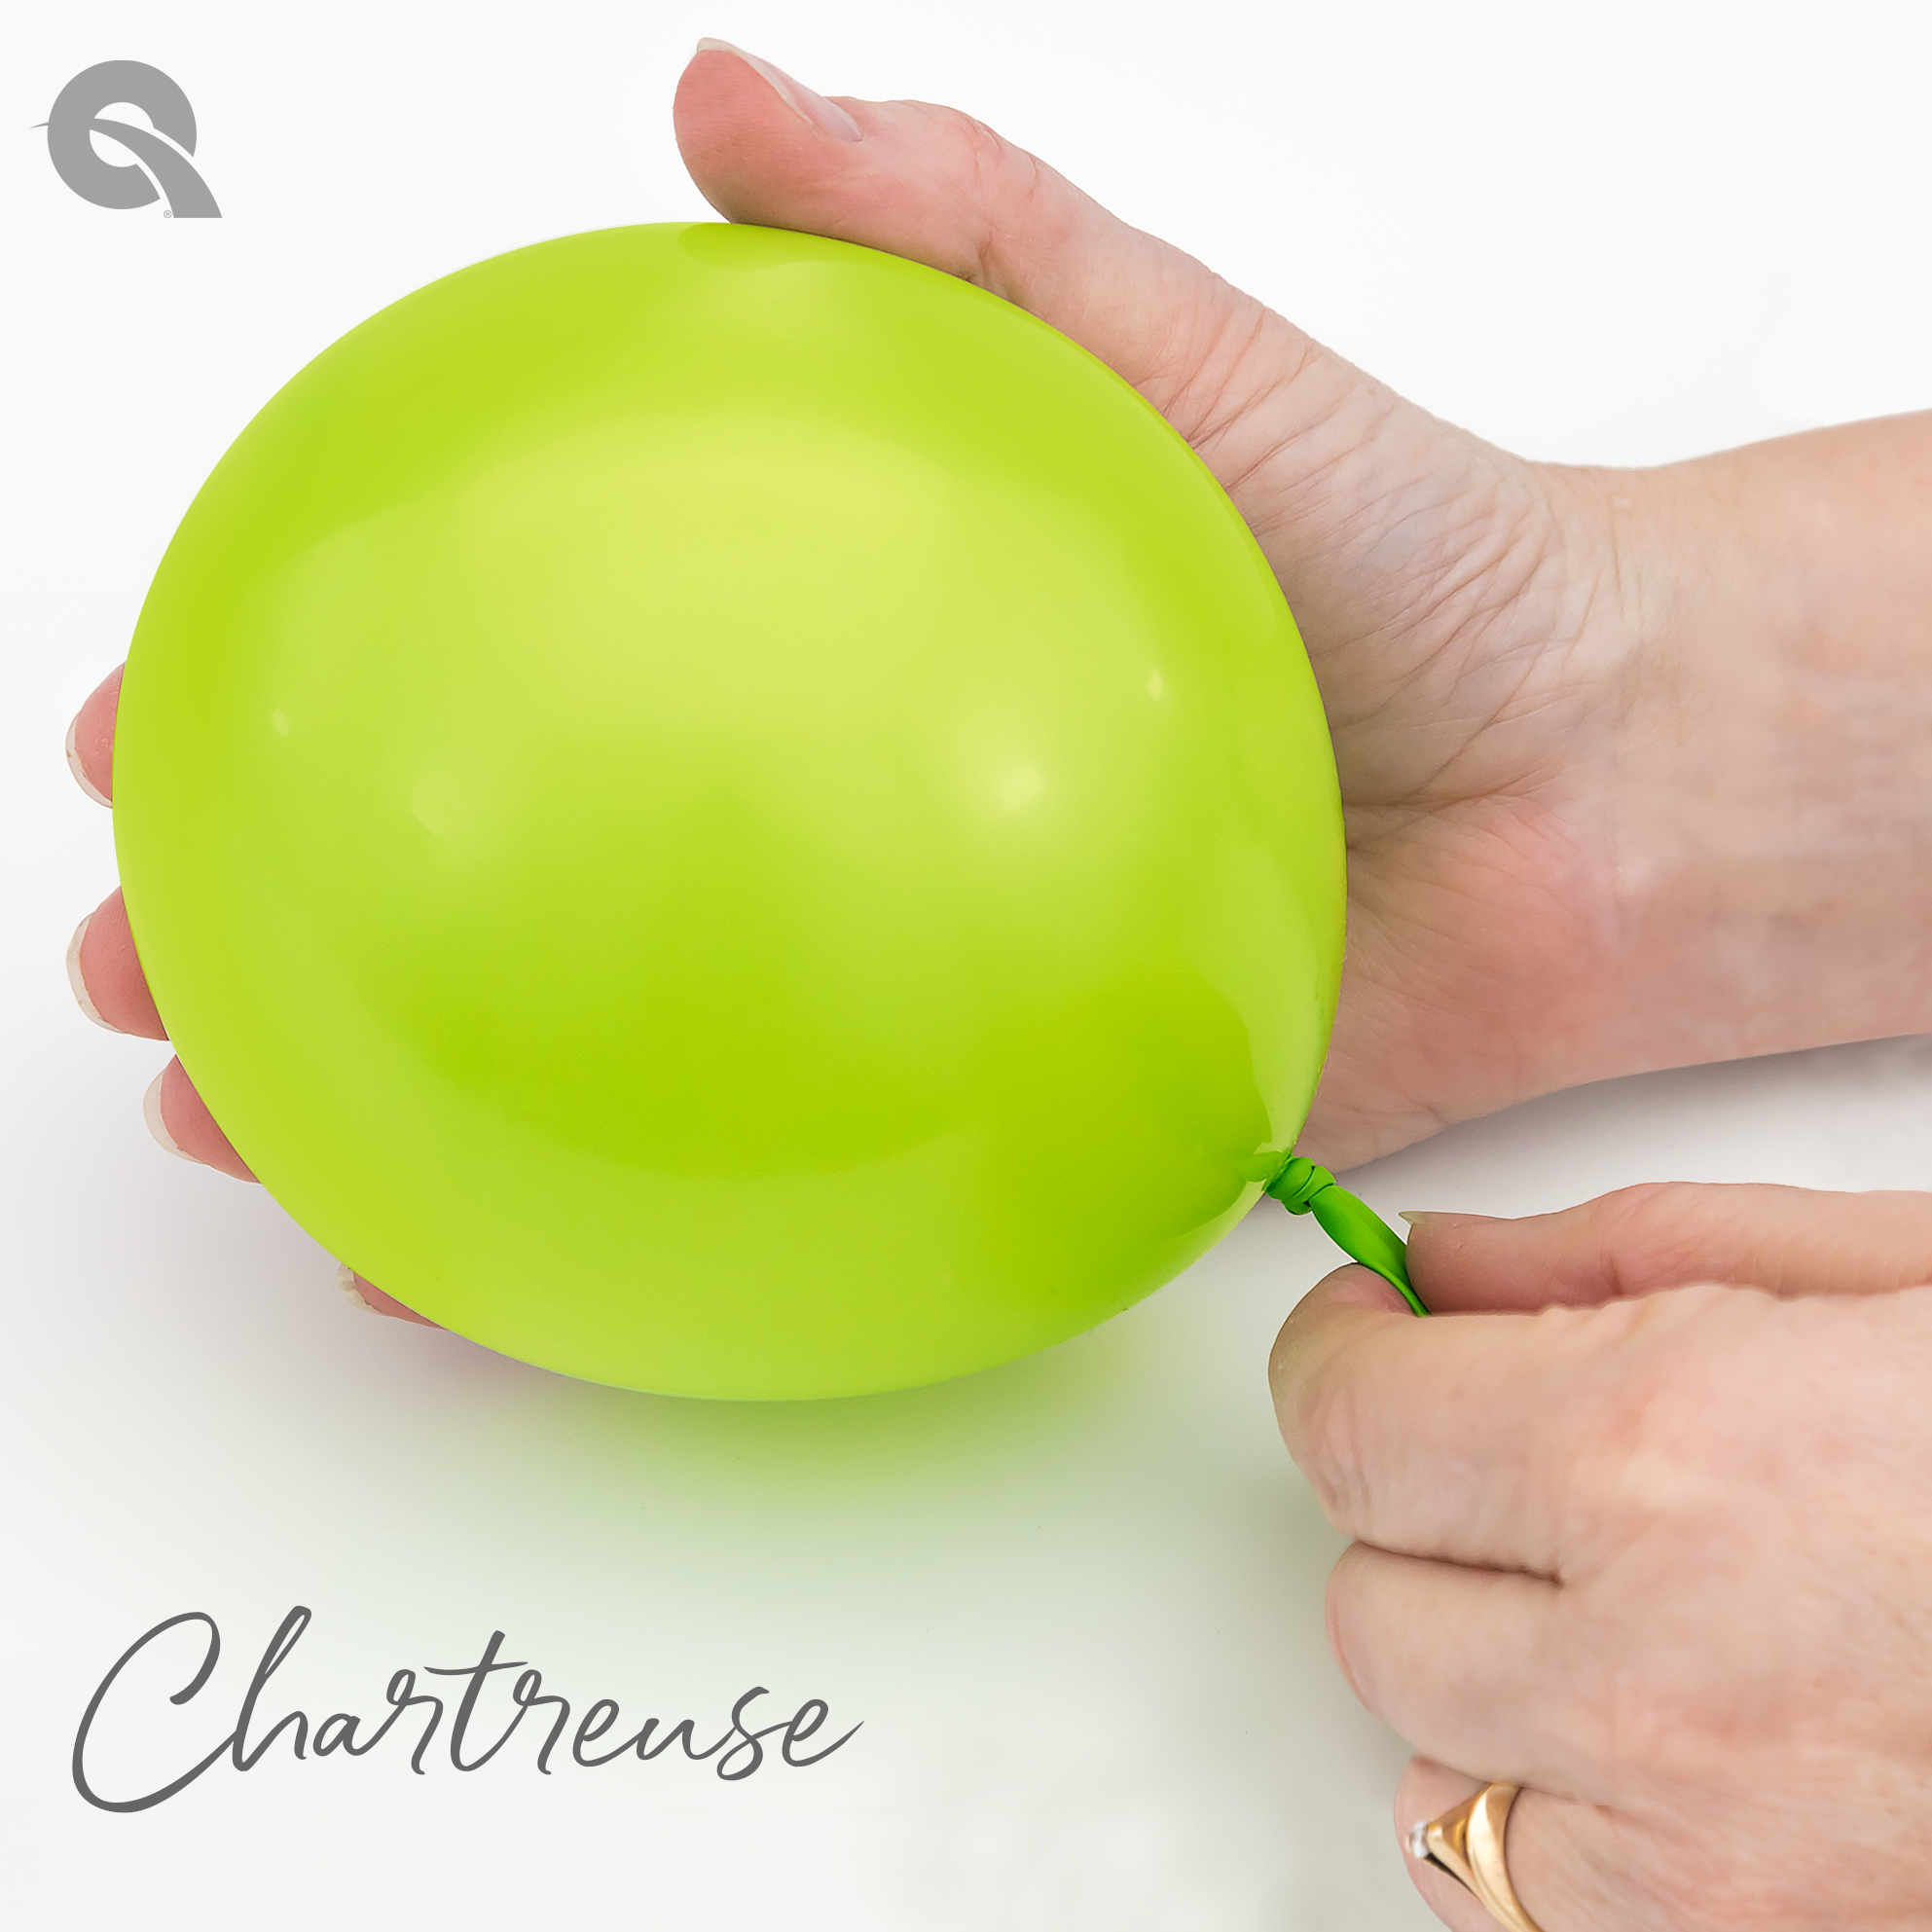 260 Qualatex Chartreuse Twisting - Entertainer Latex Balloons | 100 Count